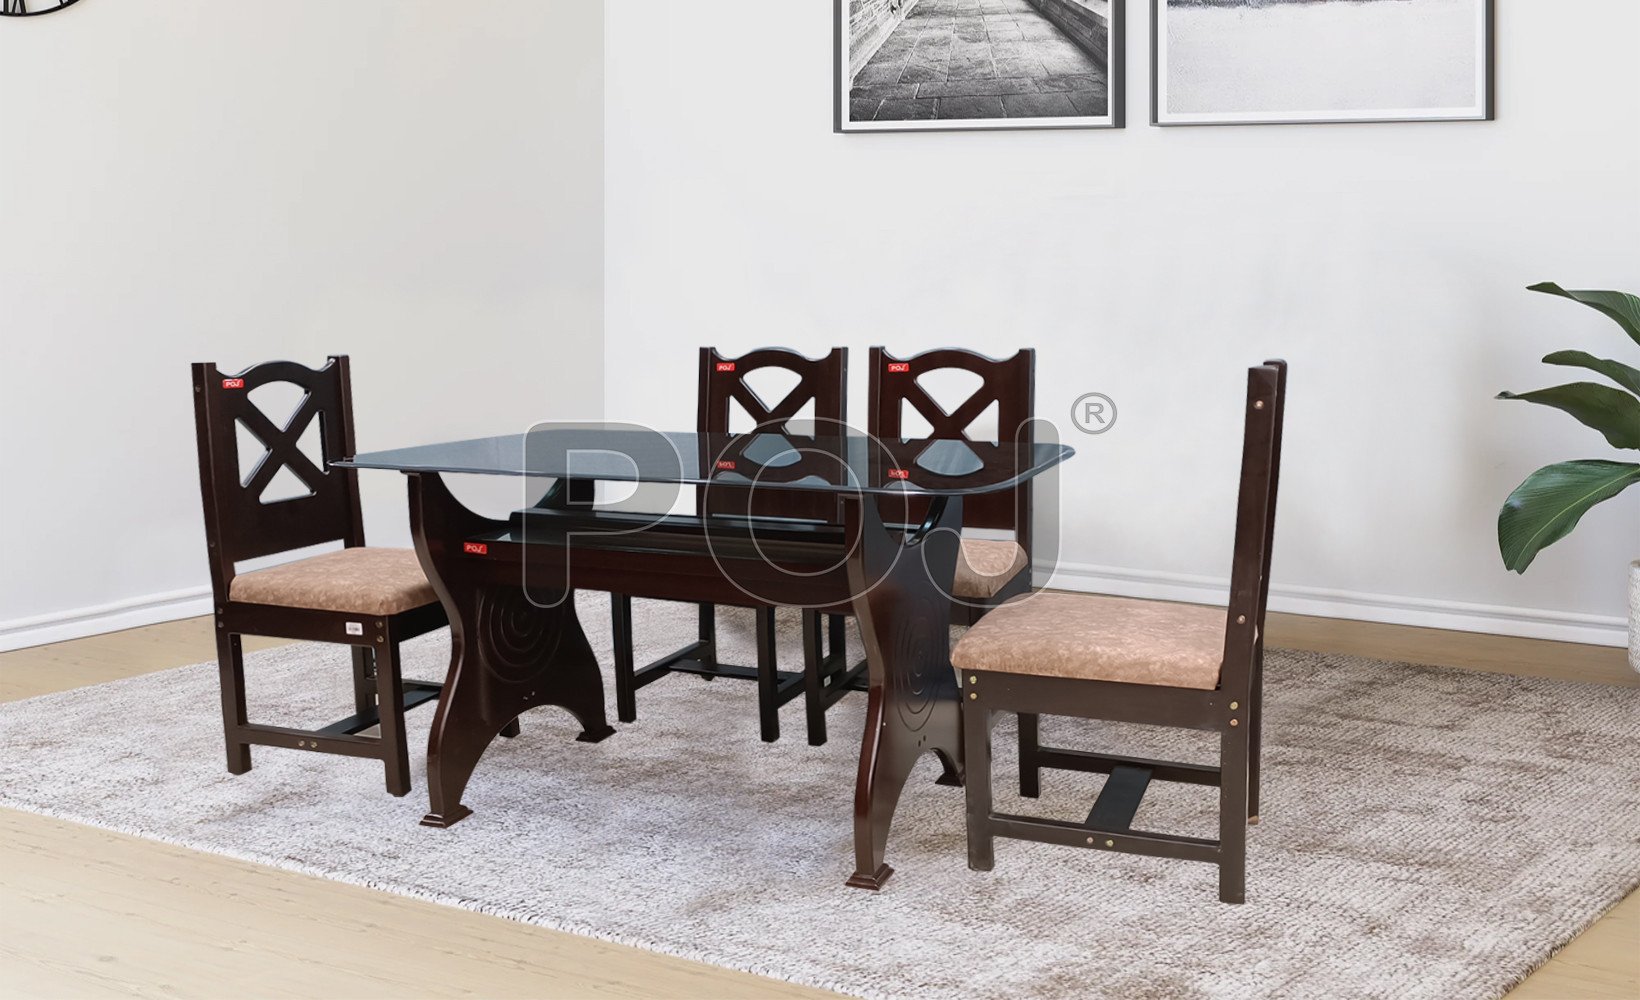 Miso 4 Seater Dining Table With Glass On Top